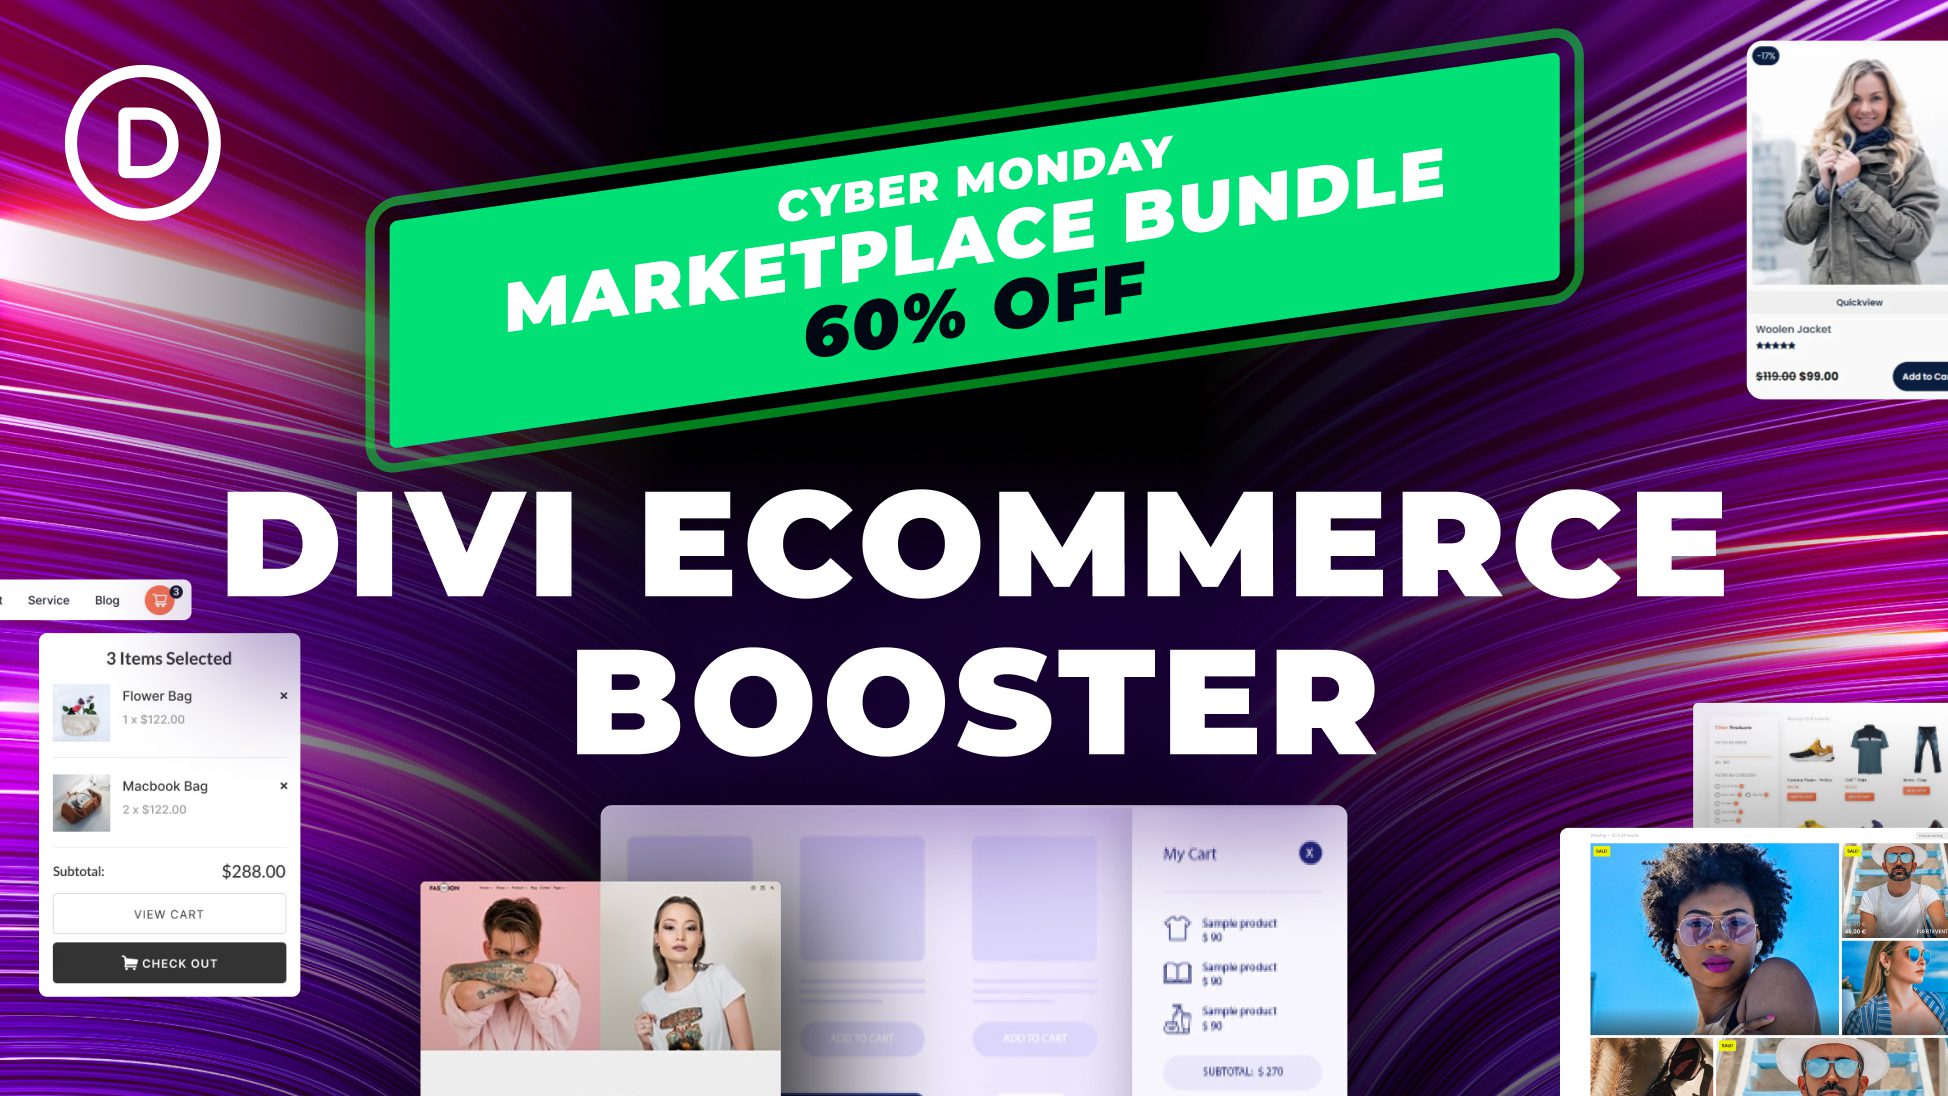 Introducing the NEW Divi Cyber Monday Ecommerce Booster Bundle